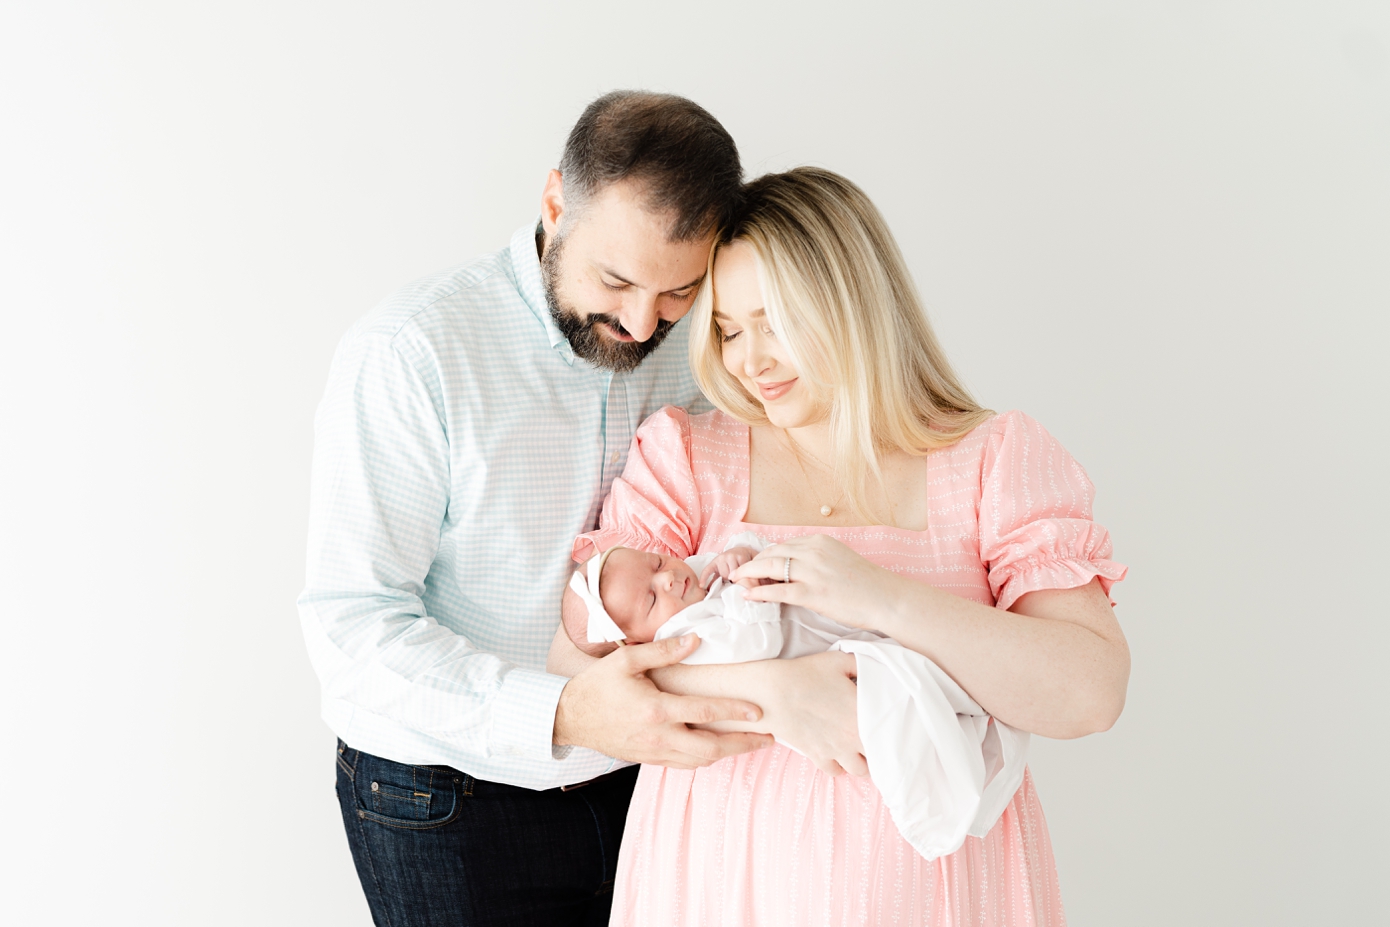 Newborn Photography in Marietta Georgia at Studio Whitlock by Lindsey Powell Photography